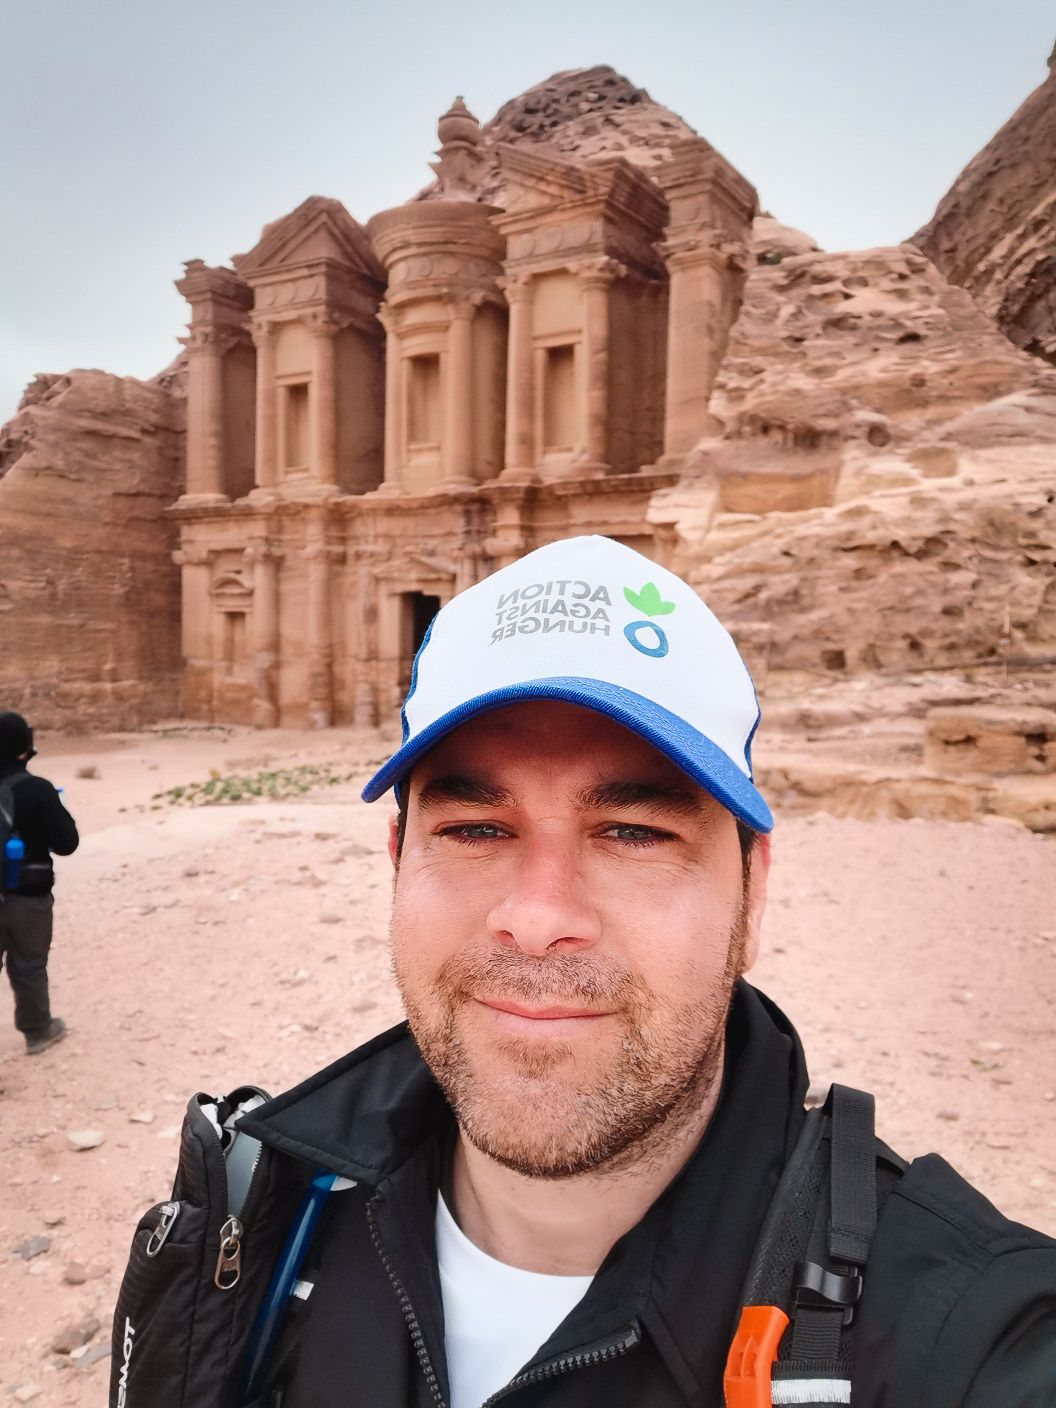 Our Executive Chef Fran Martínez at the doors of the monastery of Petra